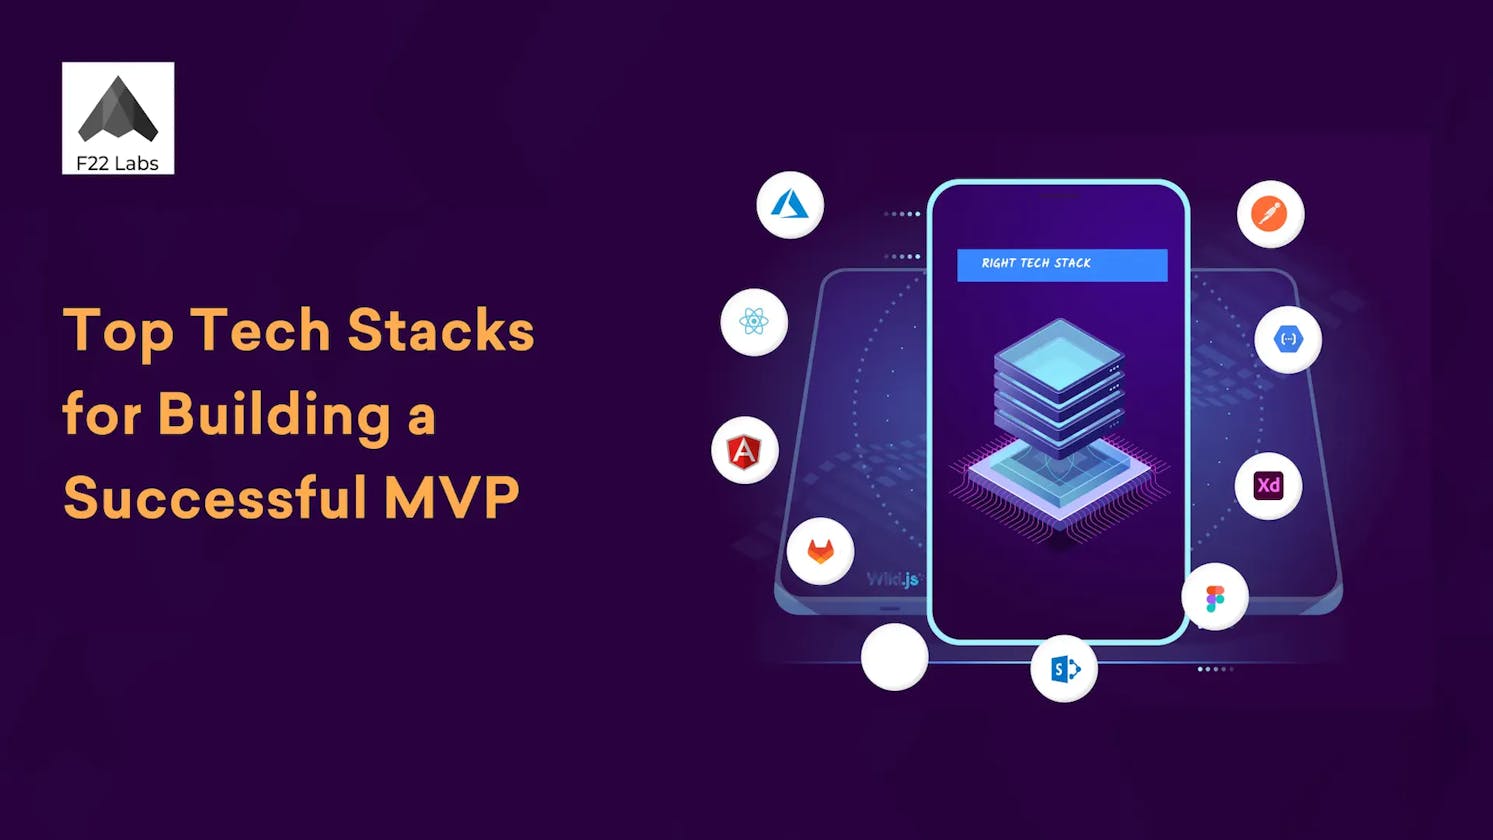 Top Tech Stacks for Building a Successful MVP